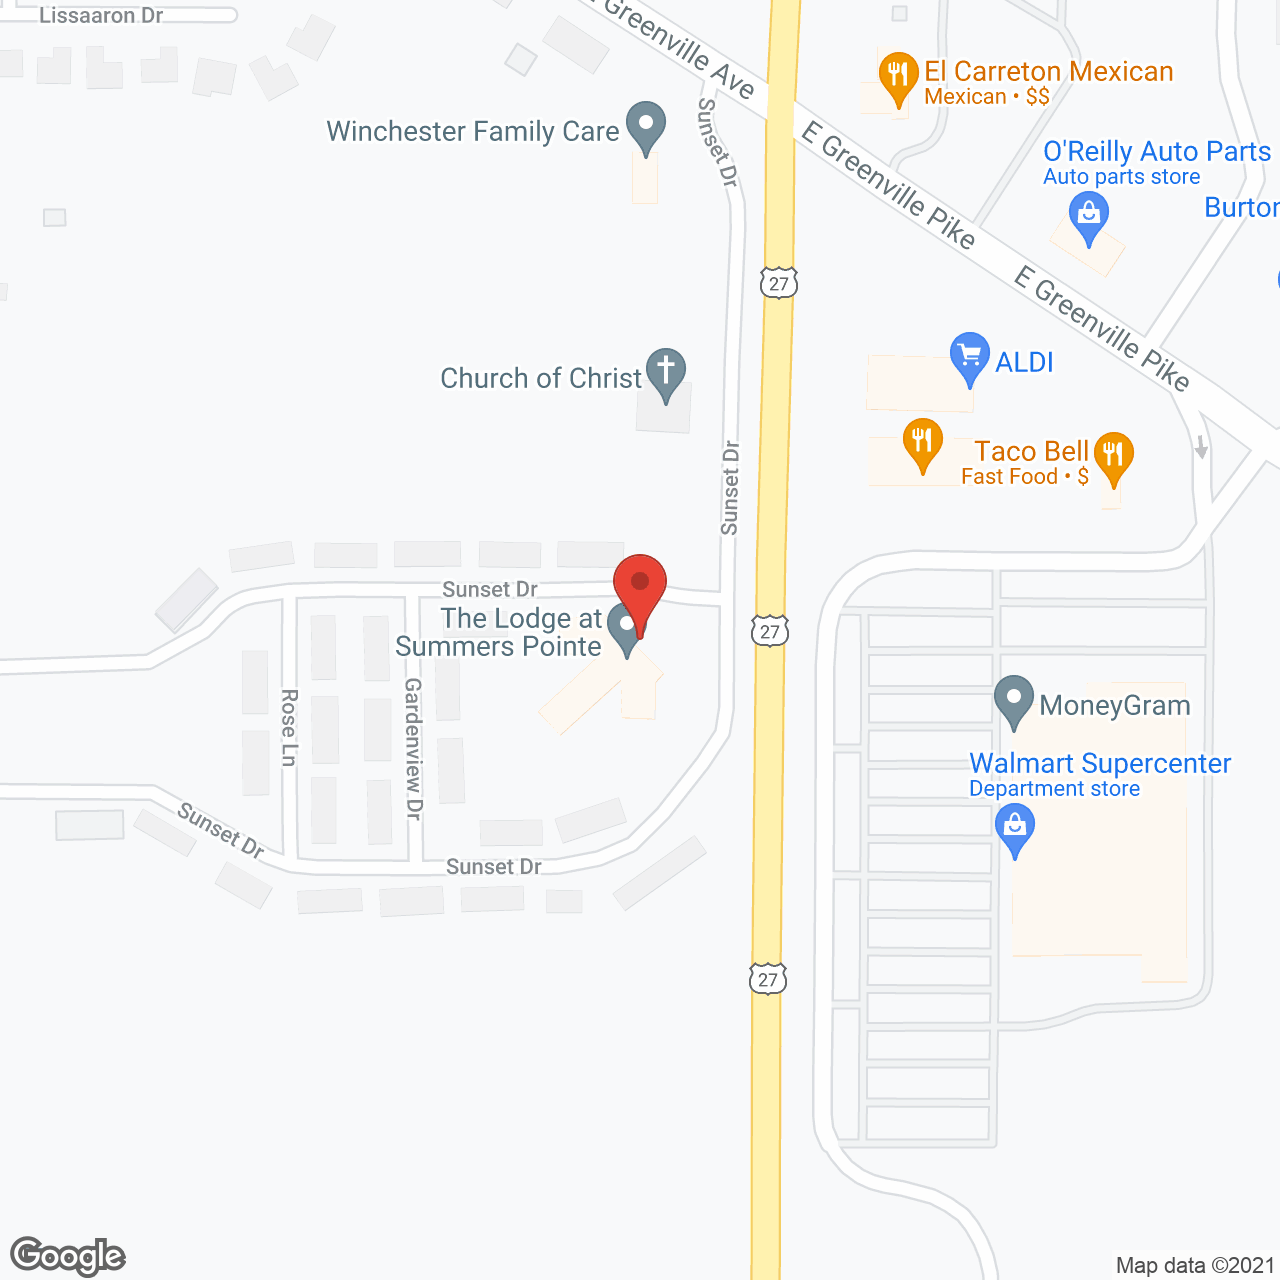 The Lodge at Summers Pointe in google map